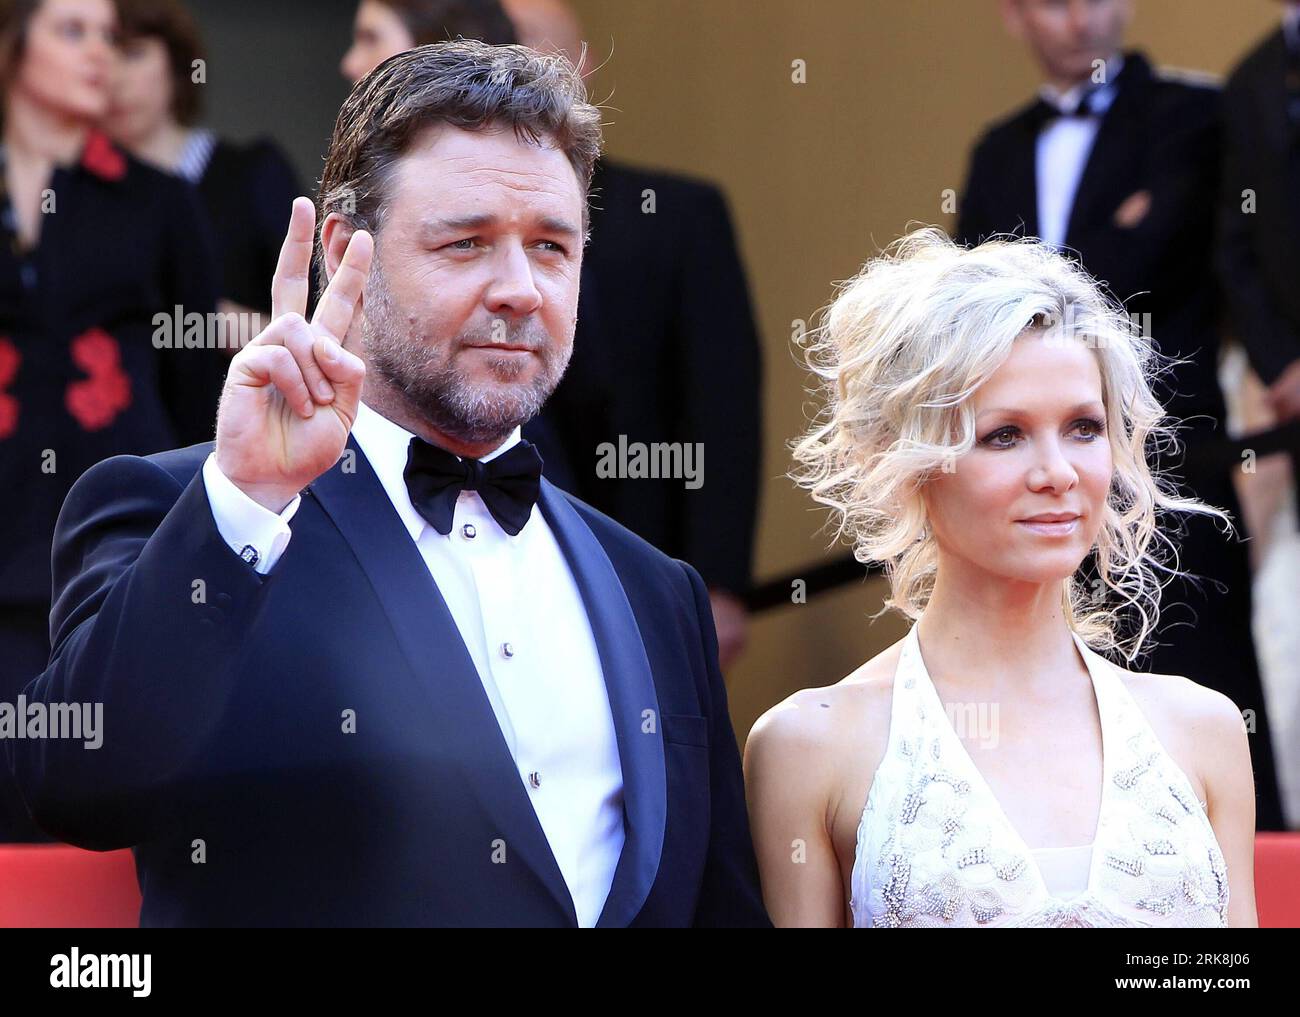 Bildnummer: 54043925  Datum: 12.05.2010  Copyright: imago/Xinhua (100513) -- CANNES, May 13, 2010 (Xinhua) -- Australian actor and cast member of film Robin Hood Russell Crowe and his wife Danielle Spencer arrive for the opening ceremony and screening of Robin Hood presented out of competition at the 63rd Cannes Film Festival in Cannes, France, May 12, 2010. (Xinhua/Zhang Yuwei) (yc) (9)FRANCE-CANNES-FILM-FESTIVAL PUBLICATIONxNOTxINxCHN People Kultur Entertainment Film 63. Internationale Filmfestspiele Filmfestival Premiere kbdig xmk 2010 quer Highlight premiumd xint  o0 Frau, Familie, Gestik Stock Photo